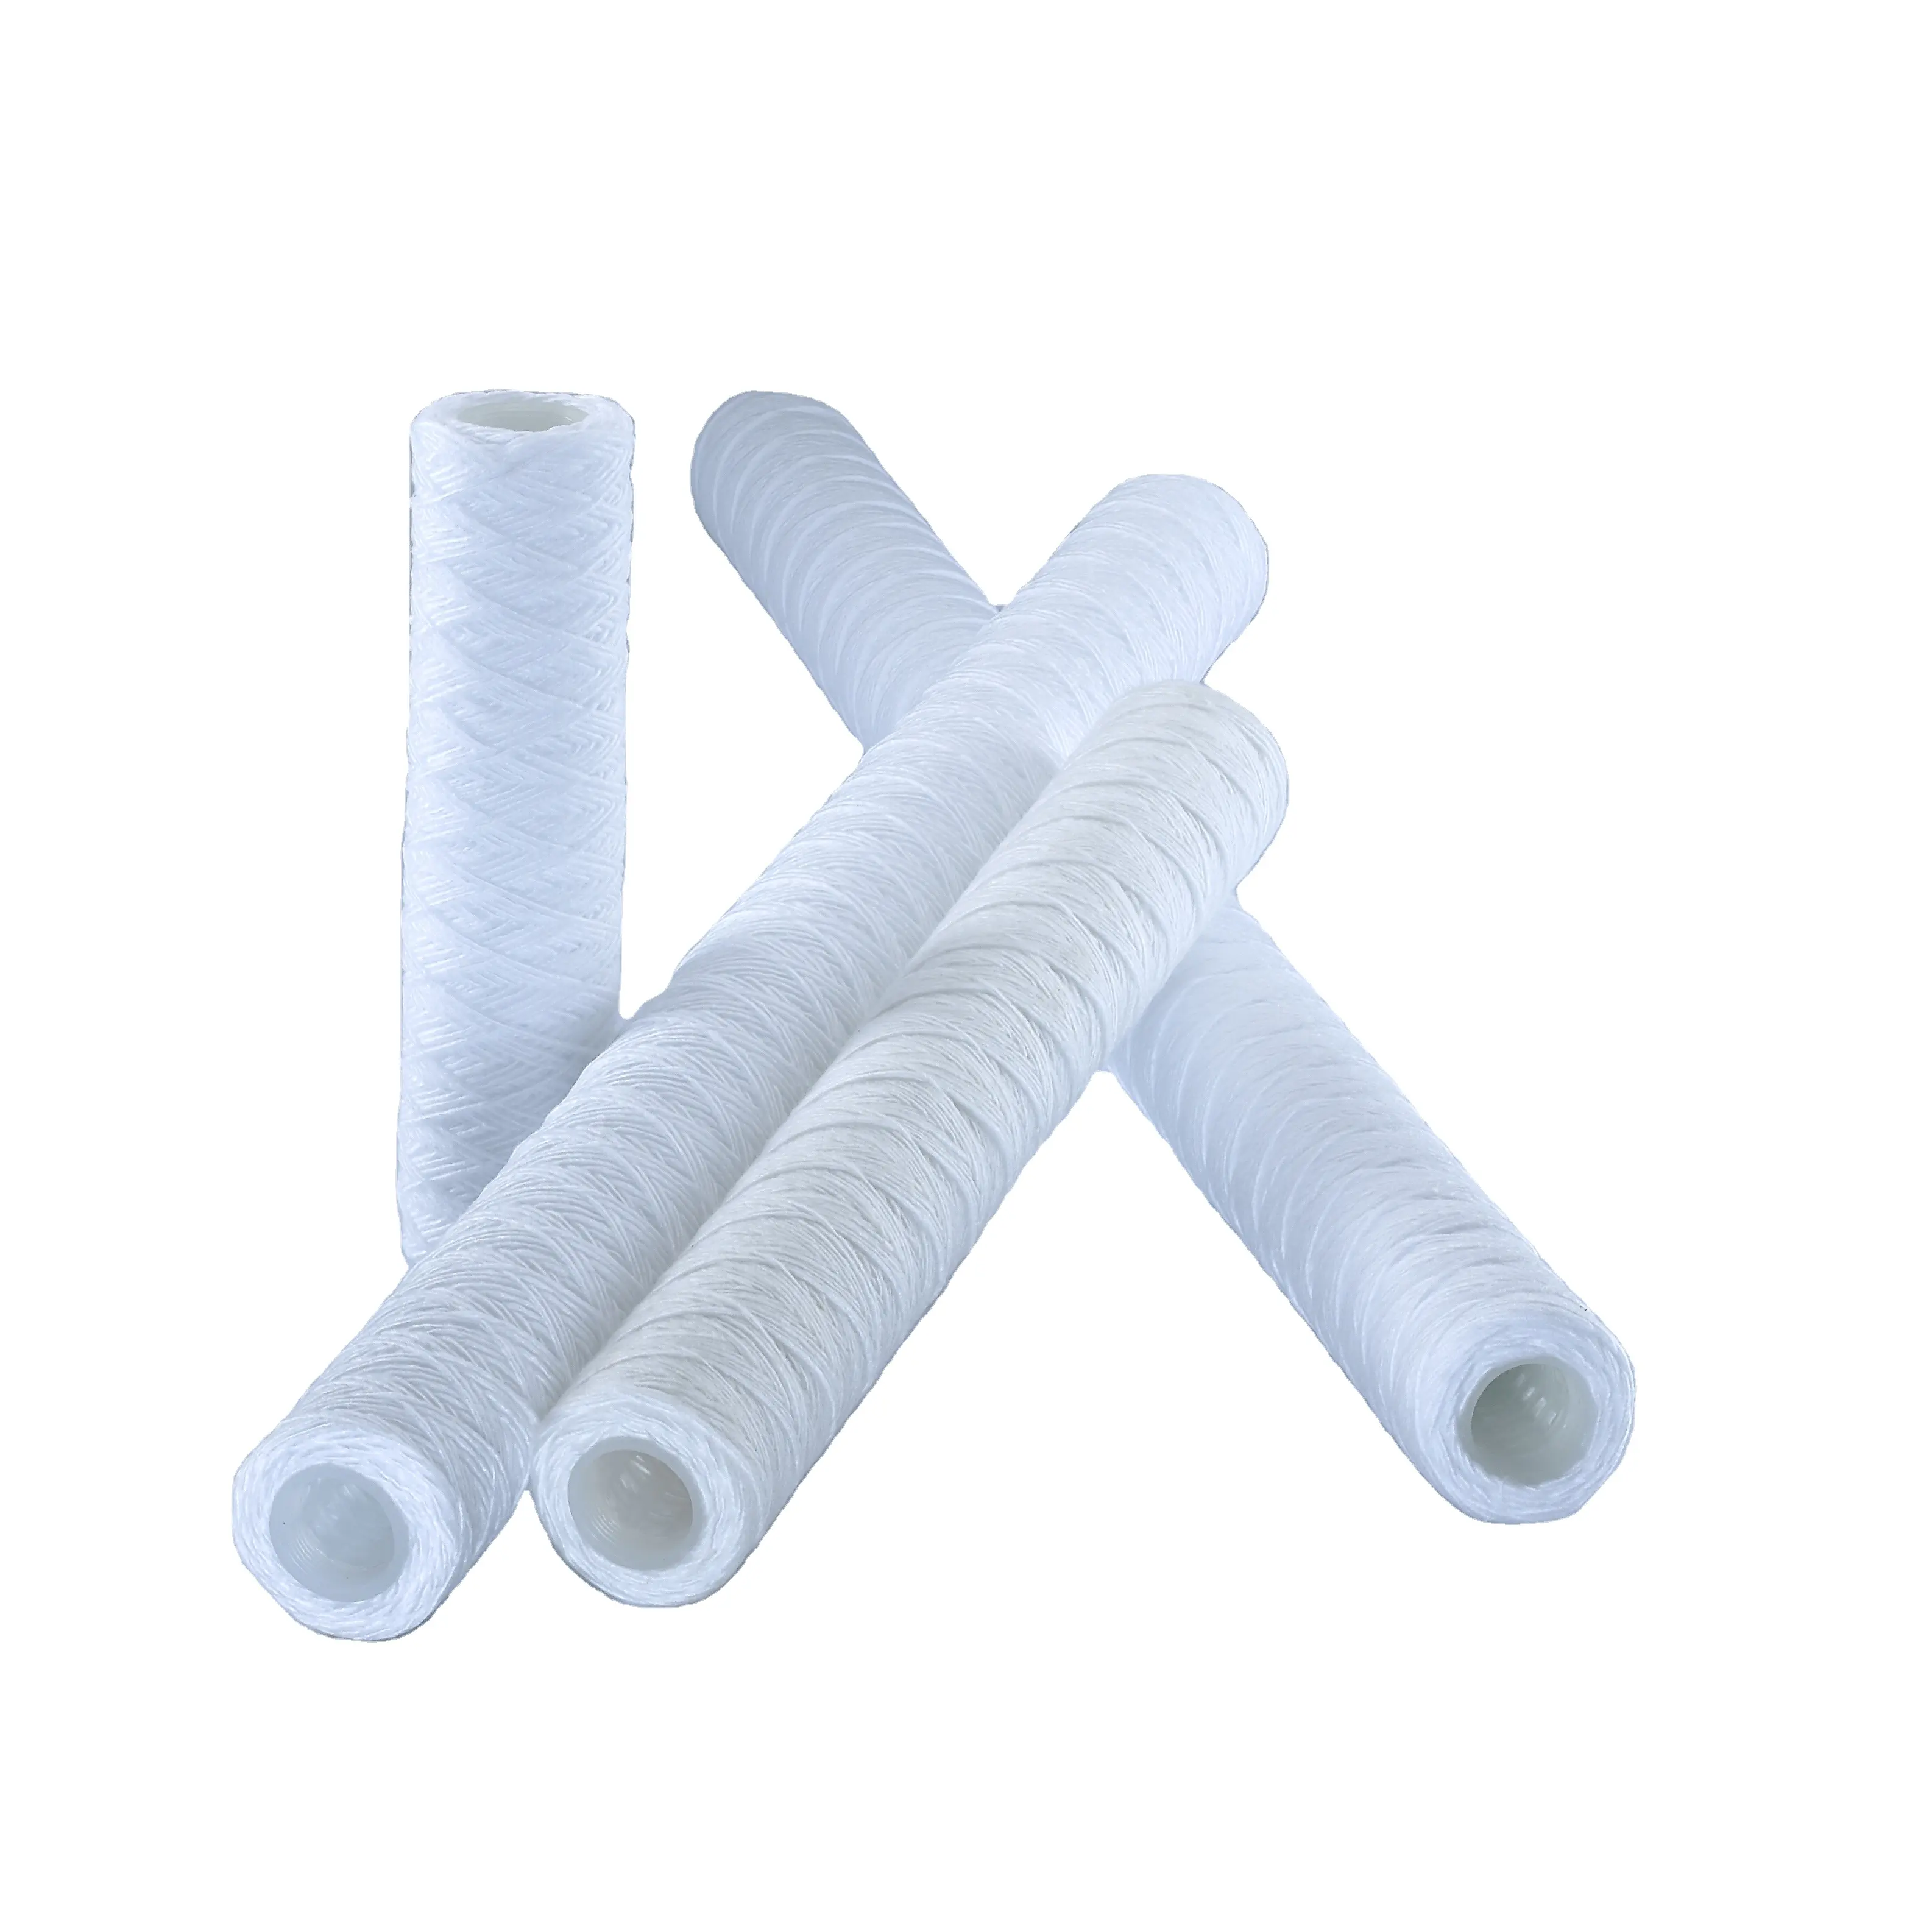 10 inch PP Yarn String Wound 10 micron Filter Cartridge